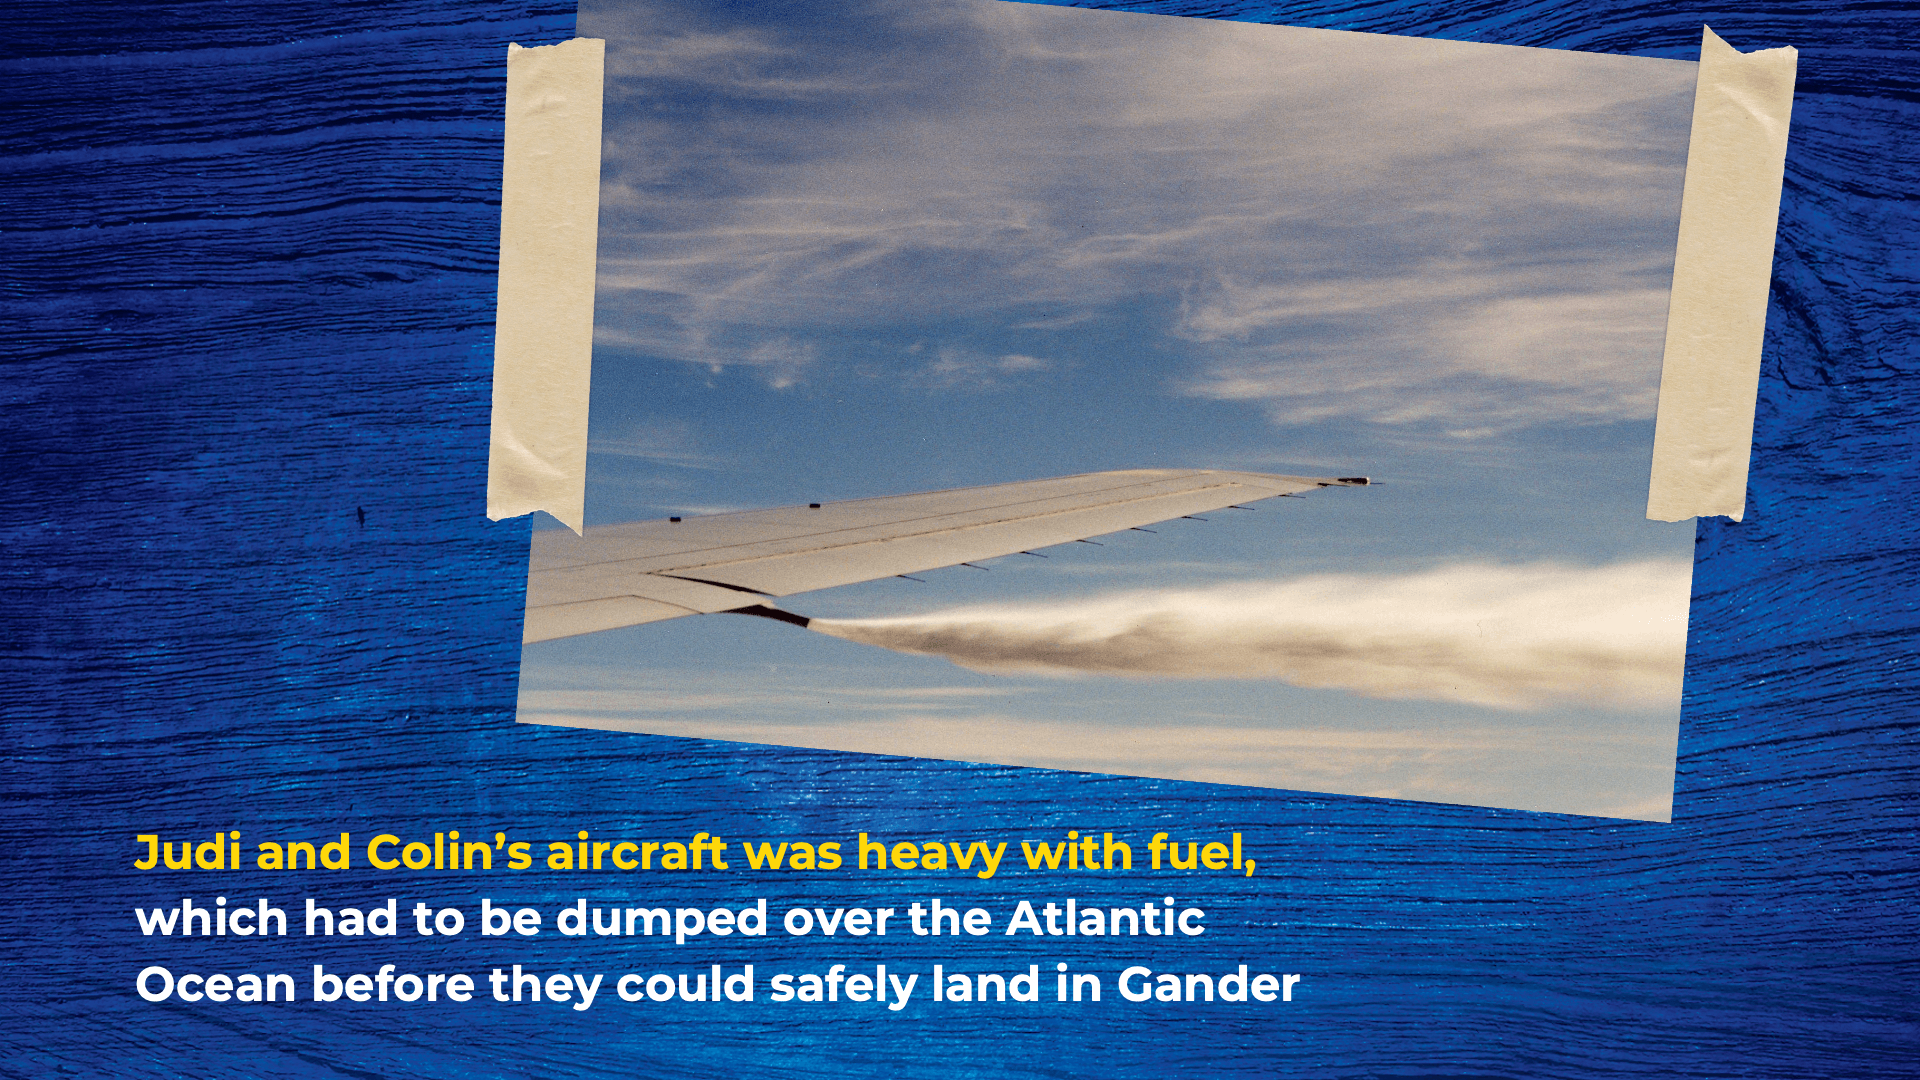 Judi and Colin’s aircraft was heavy with fuel, which had to be dumped over the Atlantic Ocean before they could safely land in Gander
